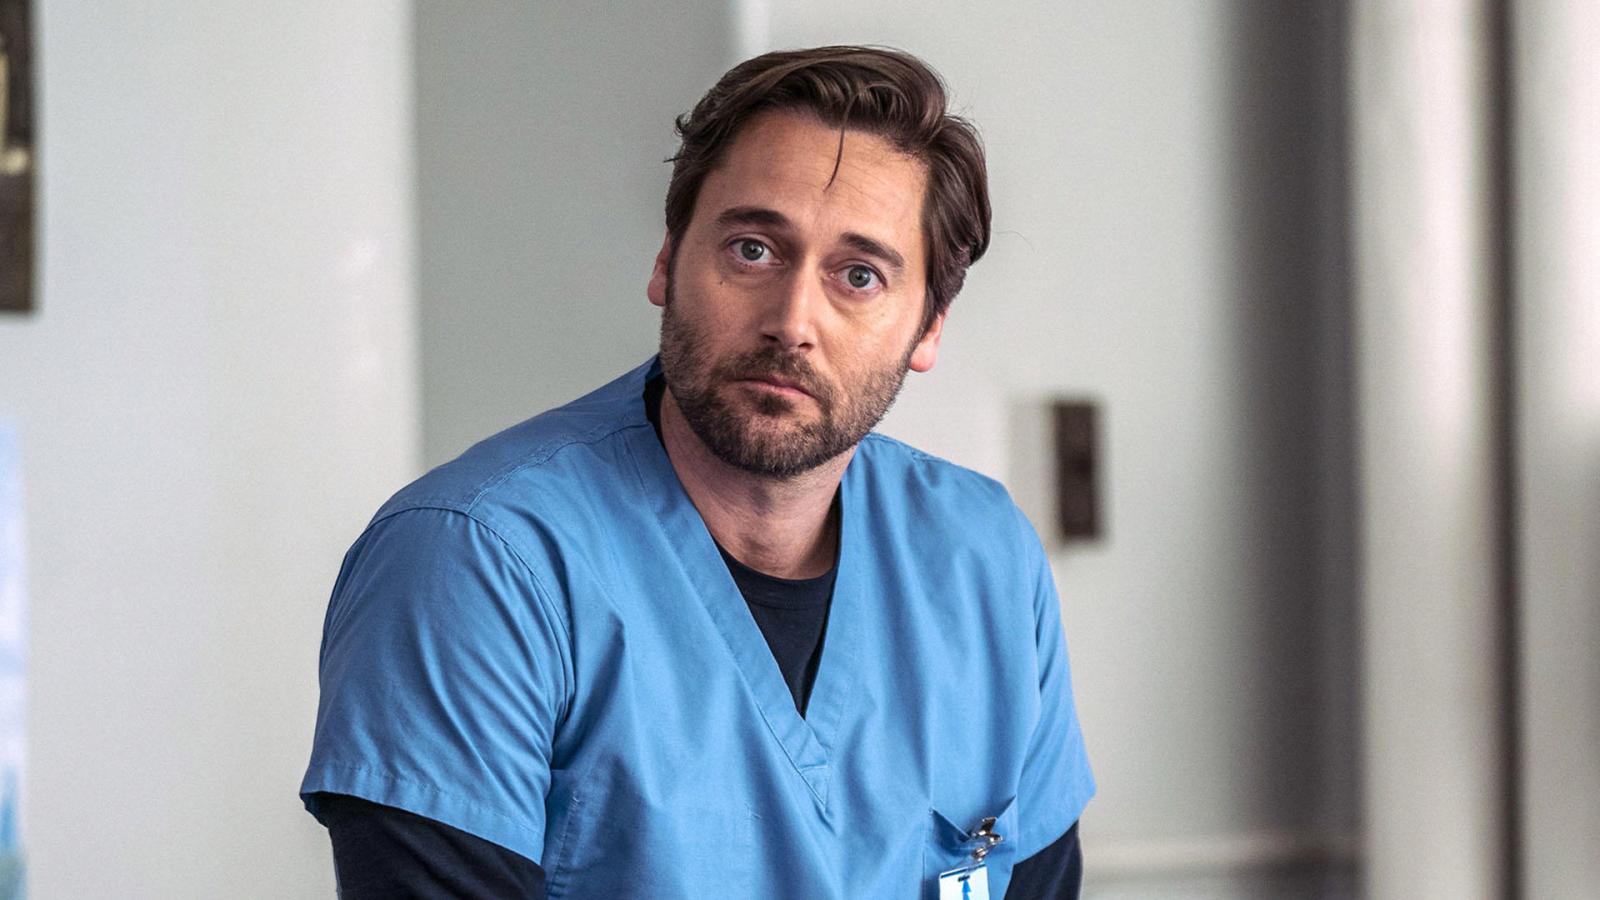 Move Over, McDreamy: Ranking the 8 Hottest Male Doctors on TV - image 1